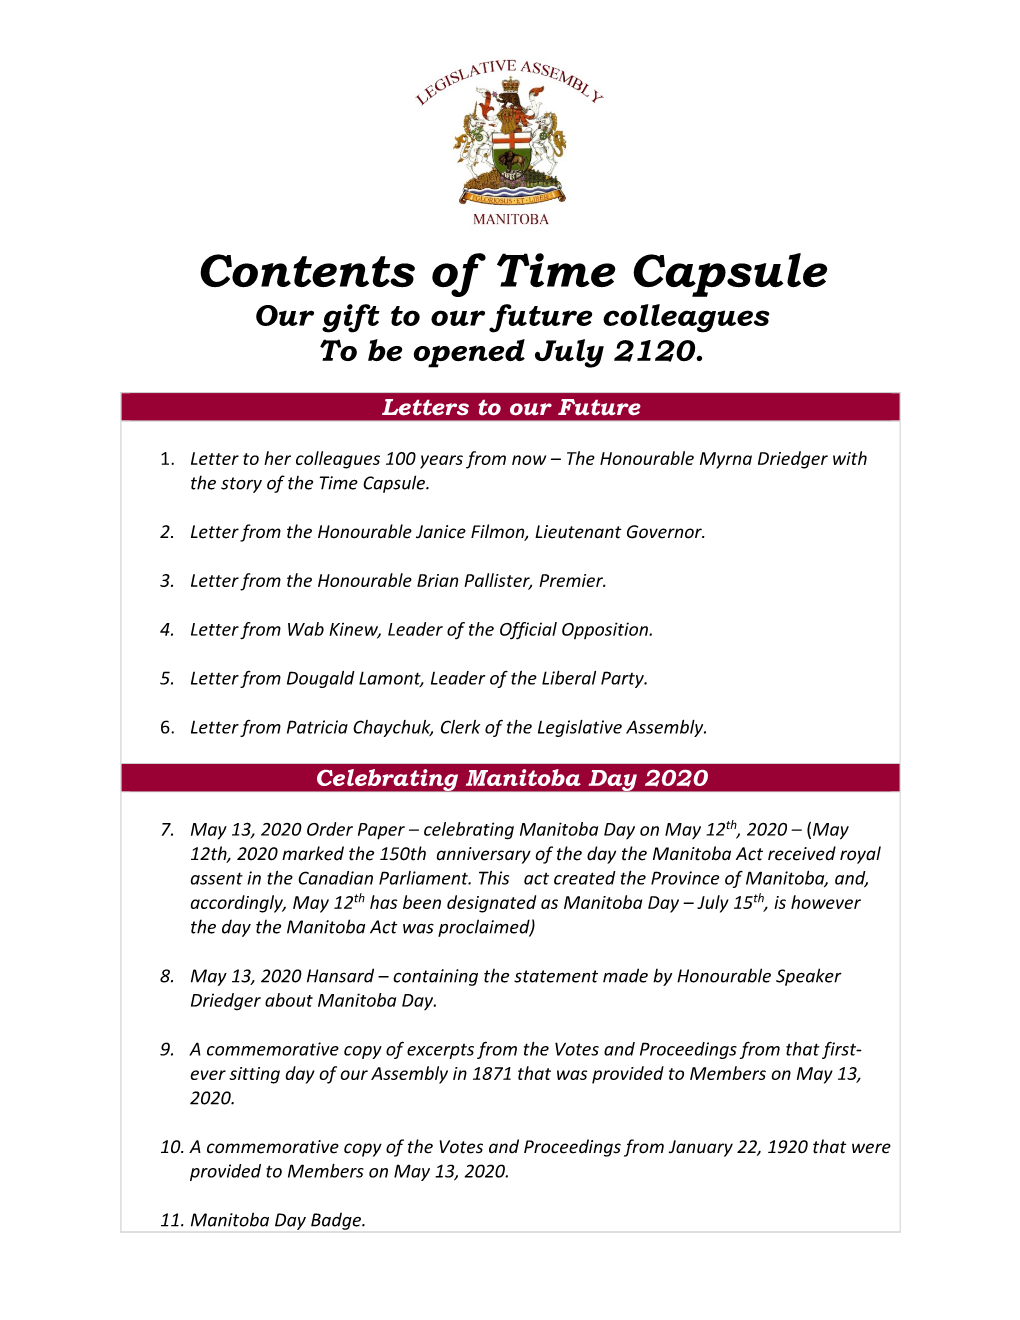 Contents of Time Capsule Our Gift to Our Future Colleagues to Be Opened July 2120